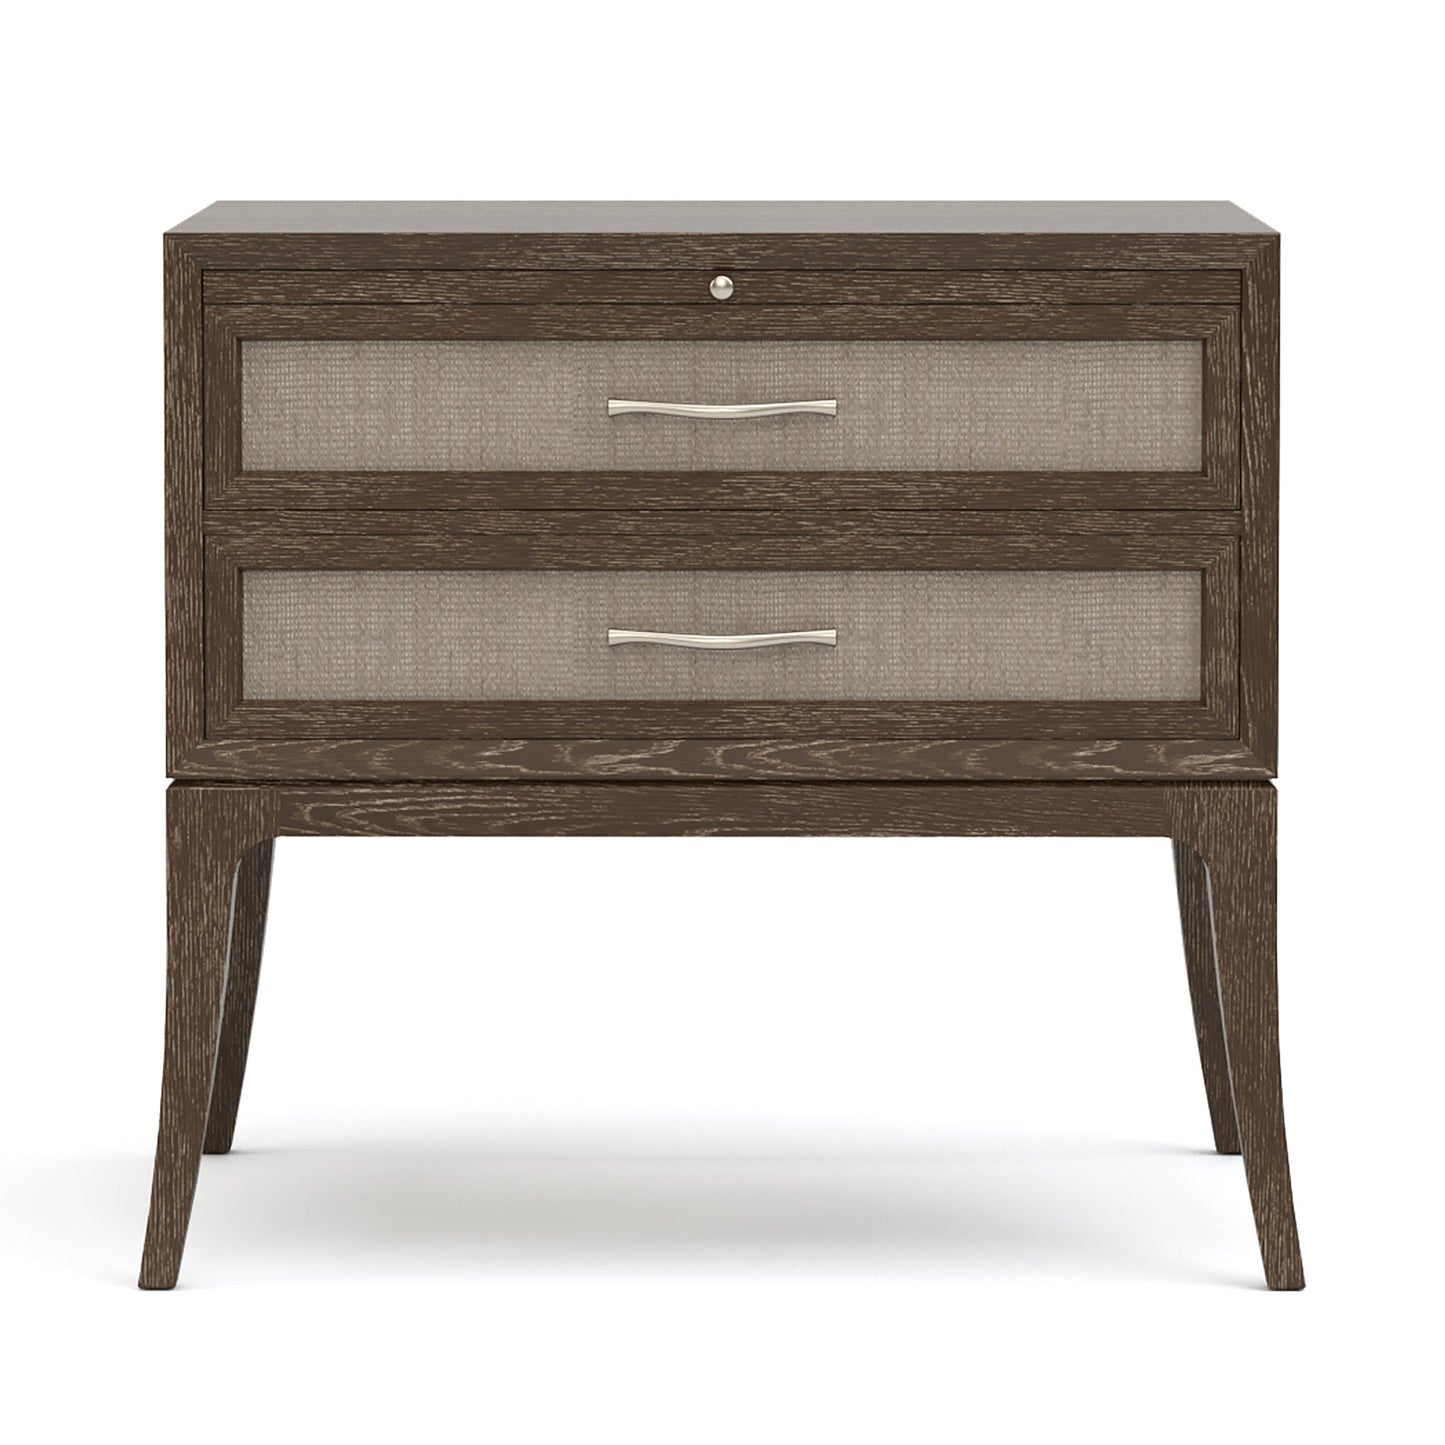 Maidstone Nightstand with Woven Jute in 202 Pier finish